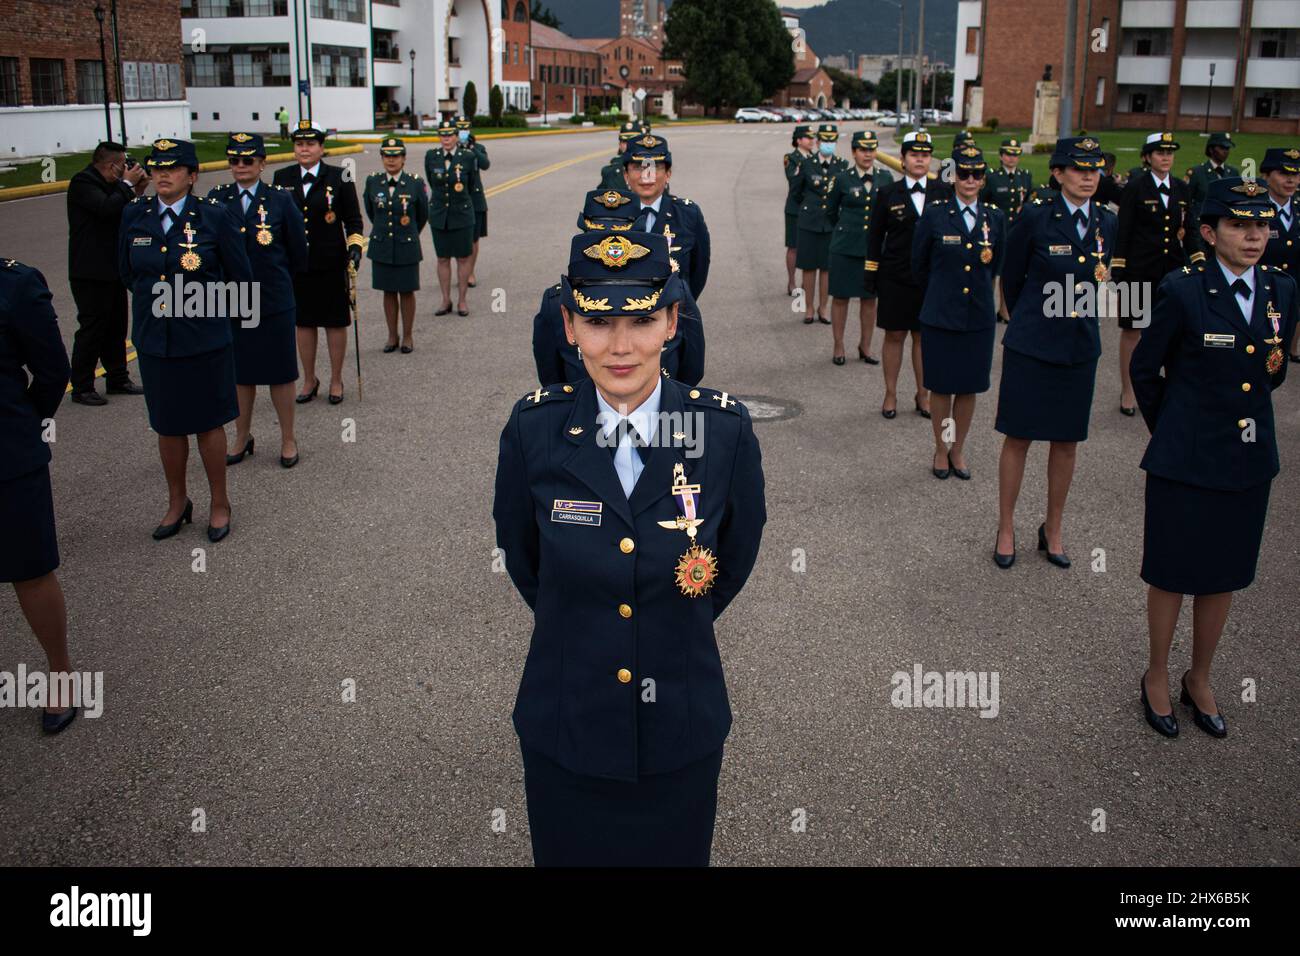 Women members of Colombia's airforce are seen during a Military honor event  given to Colombia military women members by the Military generals of  Colombia and Minister of Defense Diego Molano, in Bogota